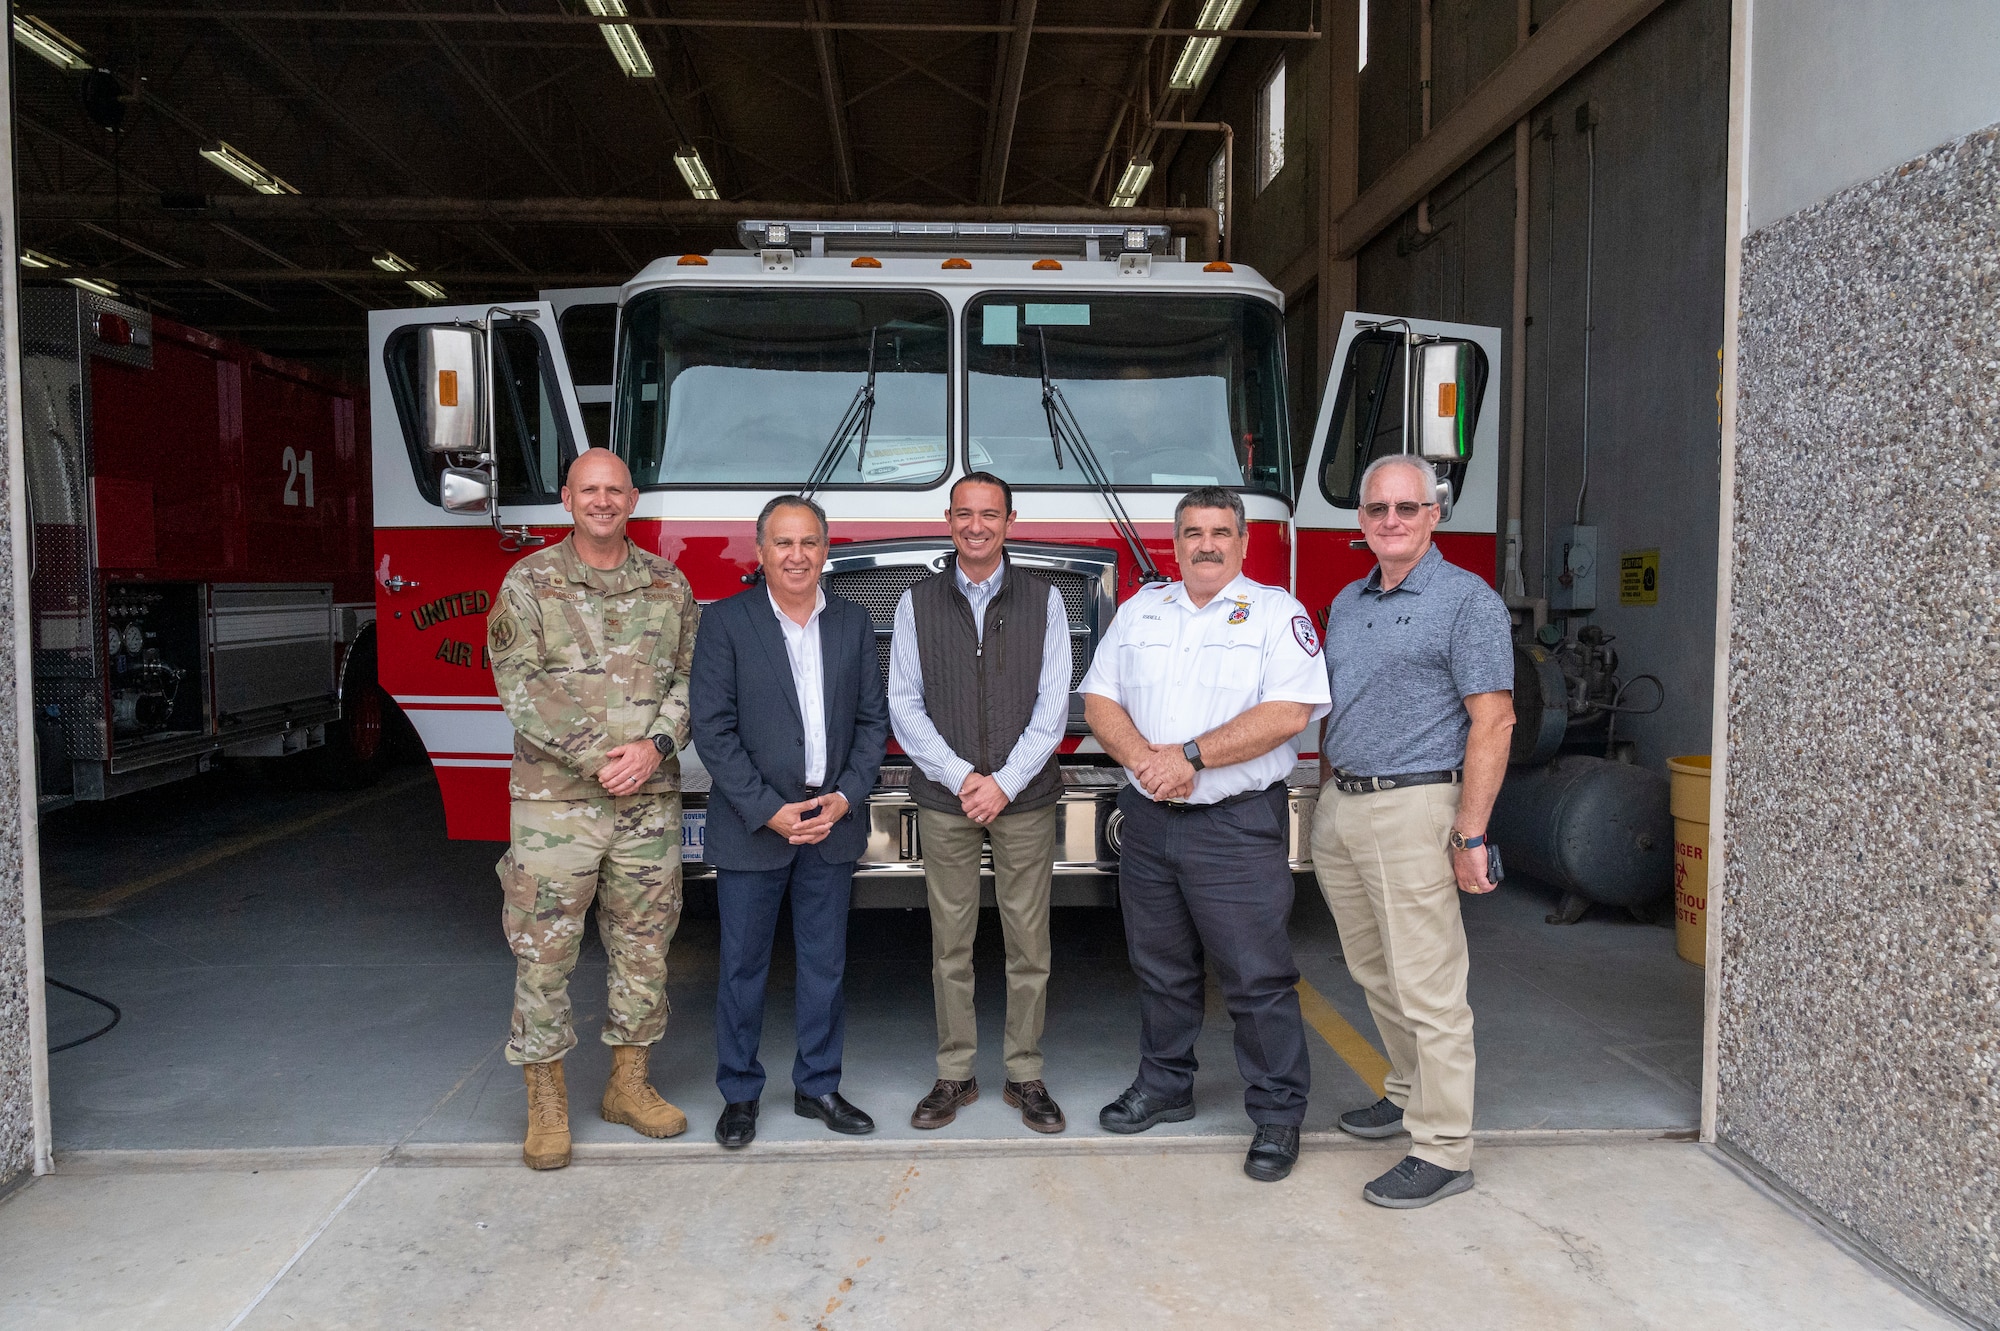 (from left to right) U.S. Air Force Col. Kevin Davidson, 47th Flying Training Wing commander, Al Arreola, Mayor of Del Rio, Texas, Emilio de Hoyos, Mayor of Ciudad Acuna, Mexico, David Isbell, 47th Civil Engineer Squadron fire chief, and John Sheedy, City Manager of Del Rio, stand in front of a fire engine at Laughlin Air Force Base, Texas, Nov. 1, 2022. Laughlin’s mission is to develop U.S. Air Force pilots and the base relies on support from the local community to make that mission a success. Familiarization tours cultivate understating of the wing’s mission and help forge lasting partnerships in the community.  (U.S. Air Force photo by Senior Airman Nicholas Larsen)